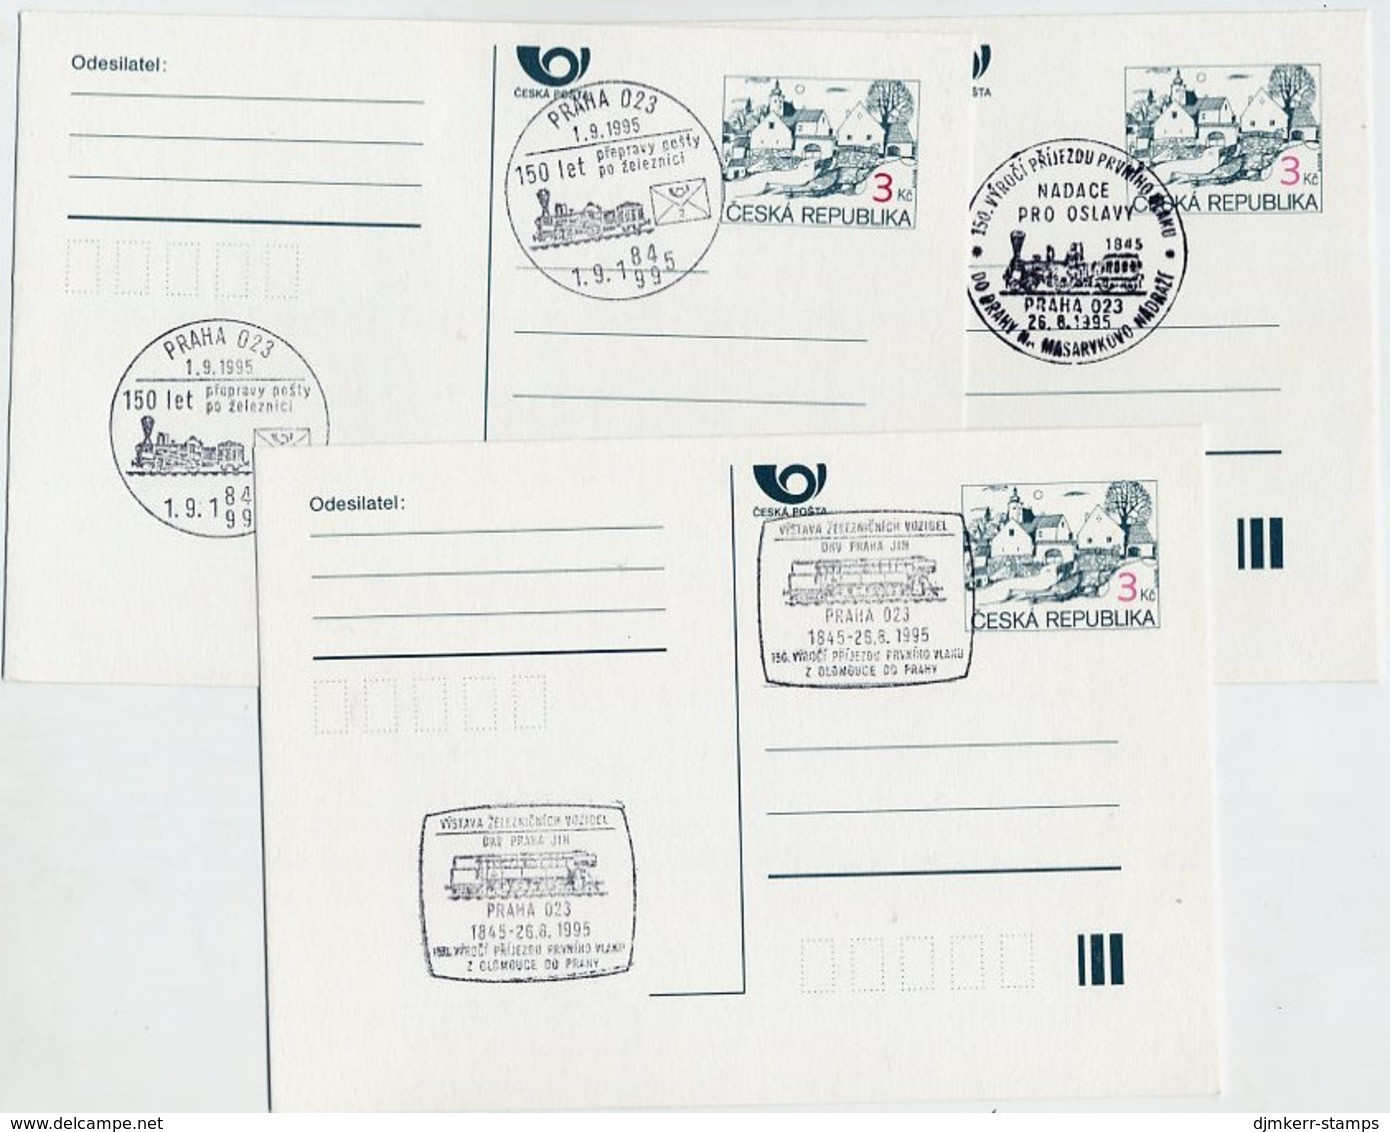 CZECH REPUBLIC 1995 Railway Anniversary 3 Kc.stationery Cards Cancelled With Commemorative Postmarks. - Lettres & Documents